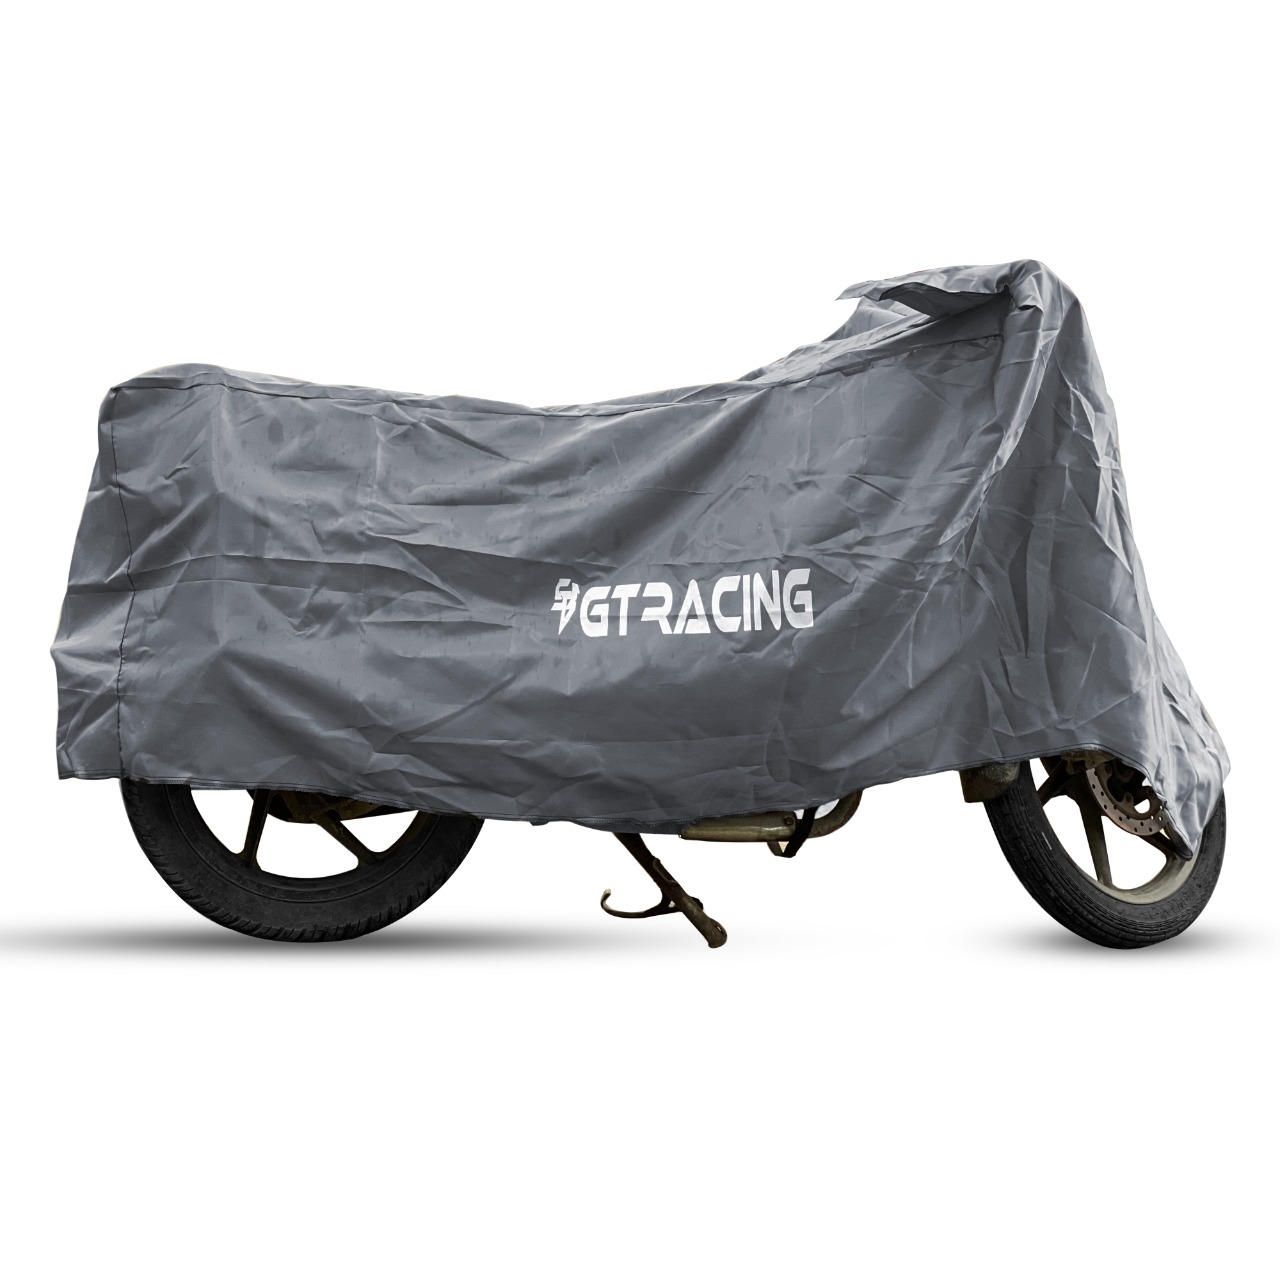 Steelbird Bike Cover GT Racing UV Protection Water-Resistant & Dustproof (2X2 Grey), Bike Body Cover With Carry Bag (All Sports Bikes And Above Cruiser Bikes Size)